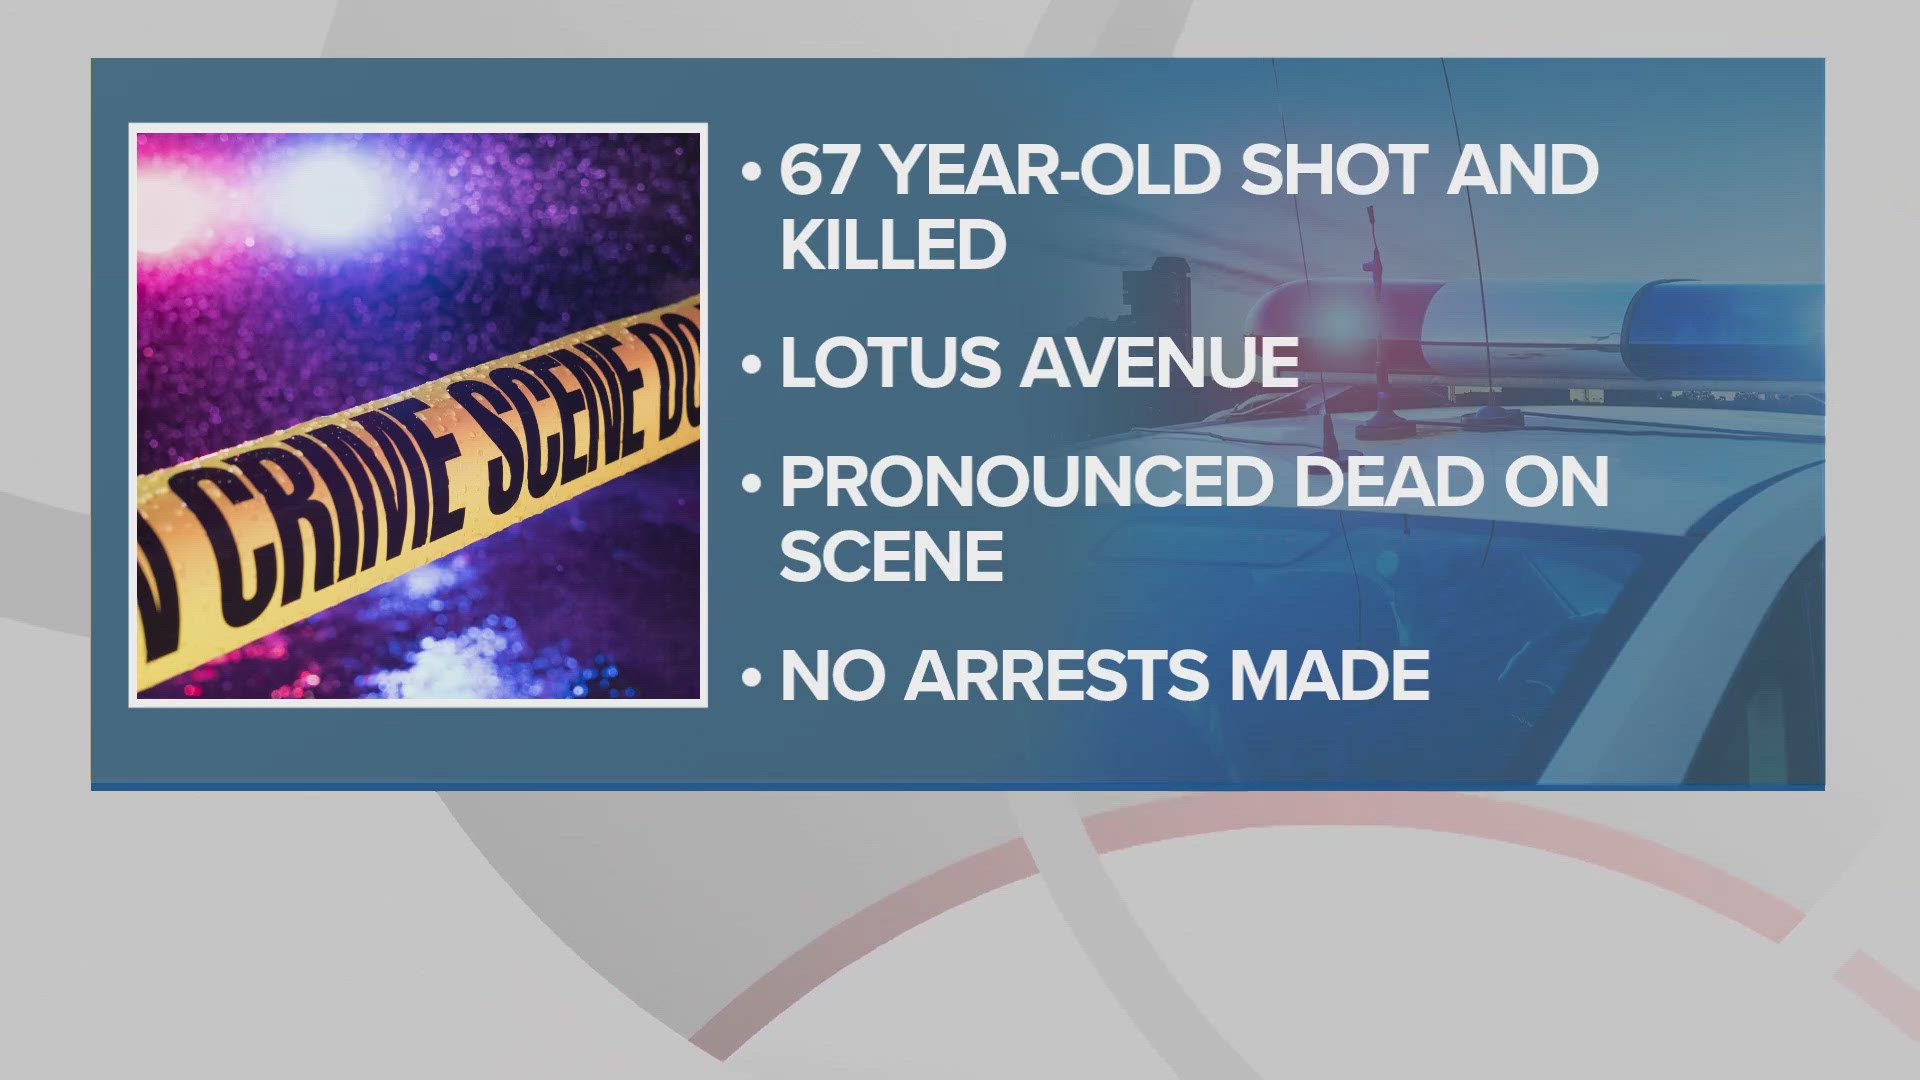 A 67-year-old man was found with gunshot wounds on the 15800 block of Lotus Avenue at around 4:20 p.m. Friday.